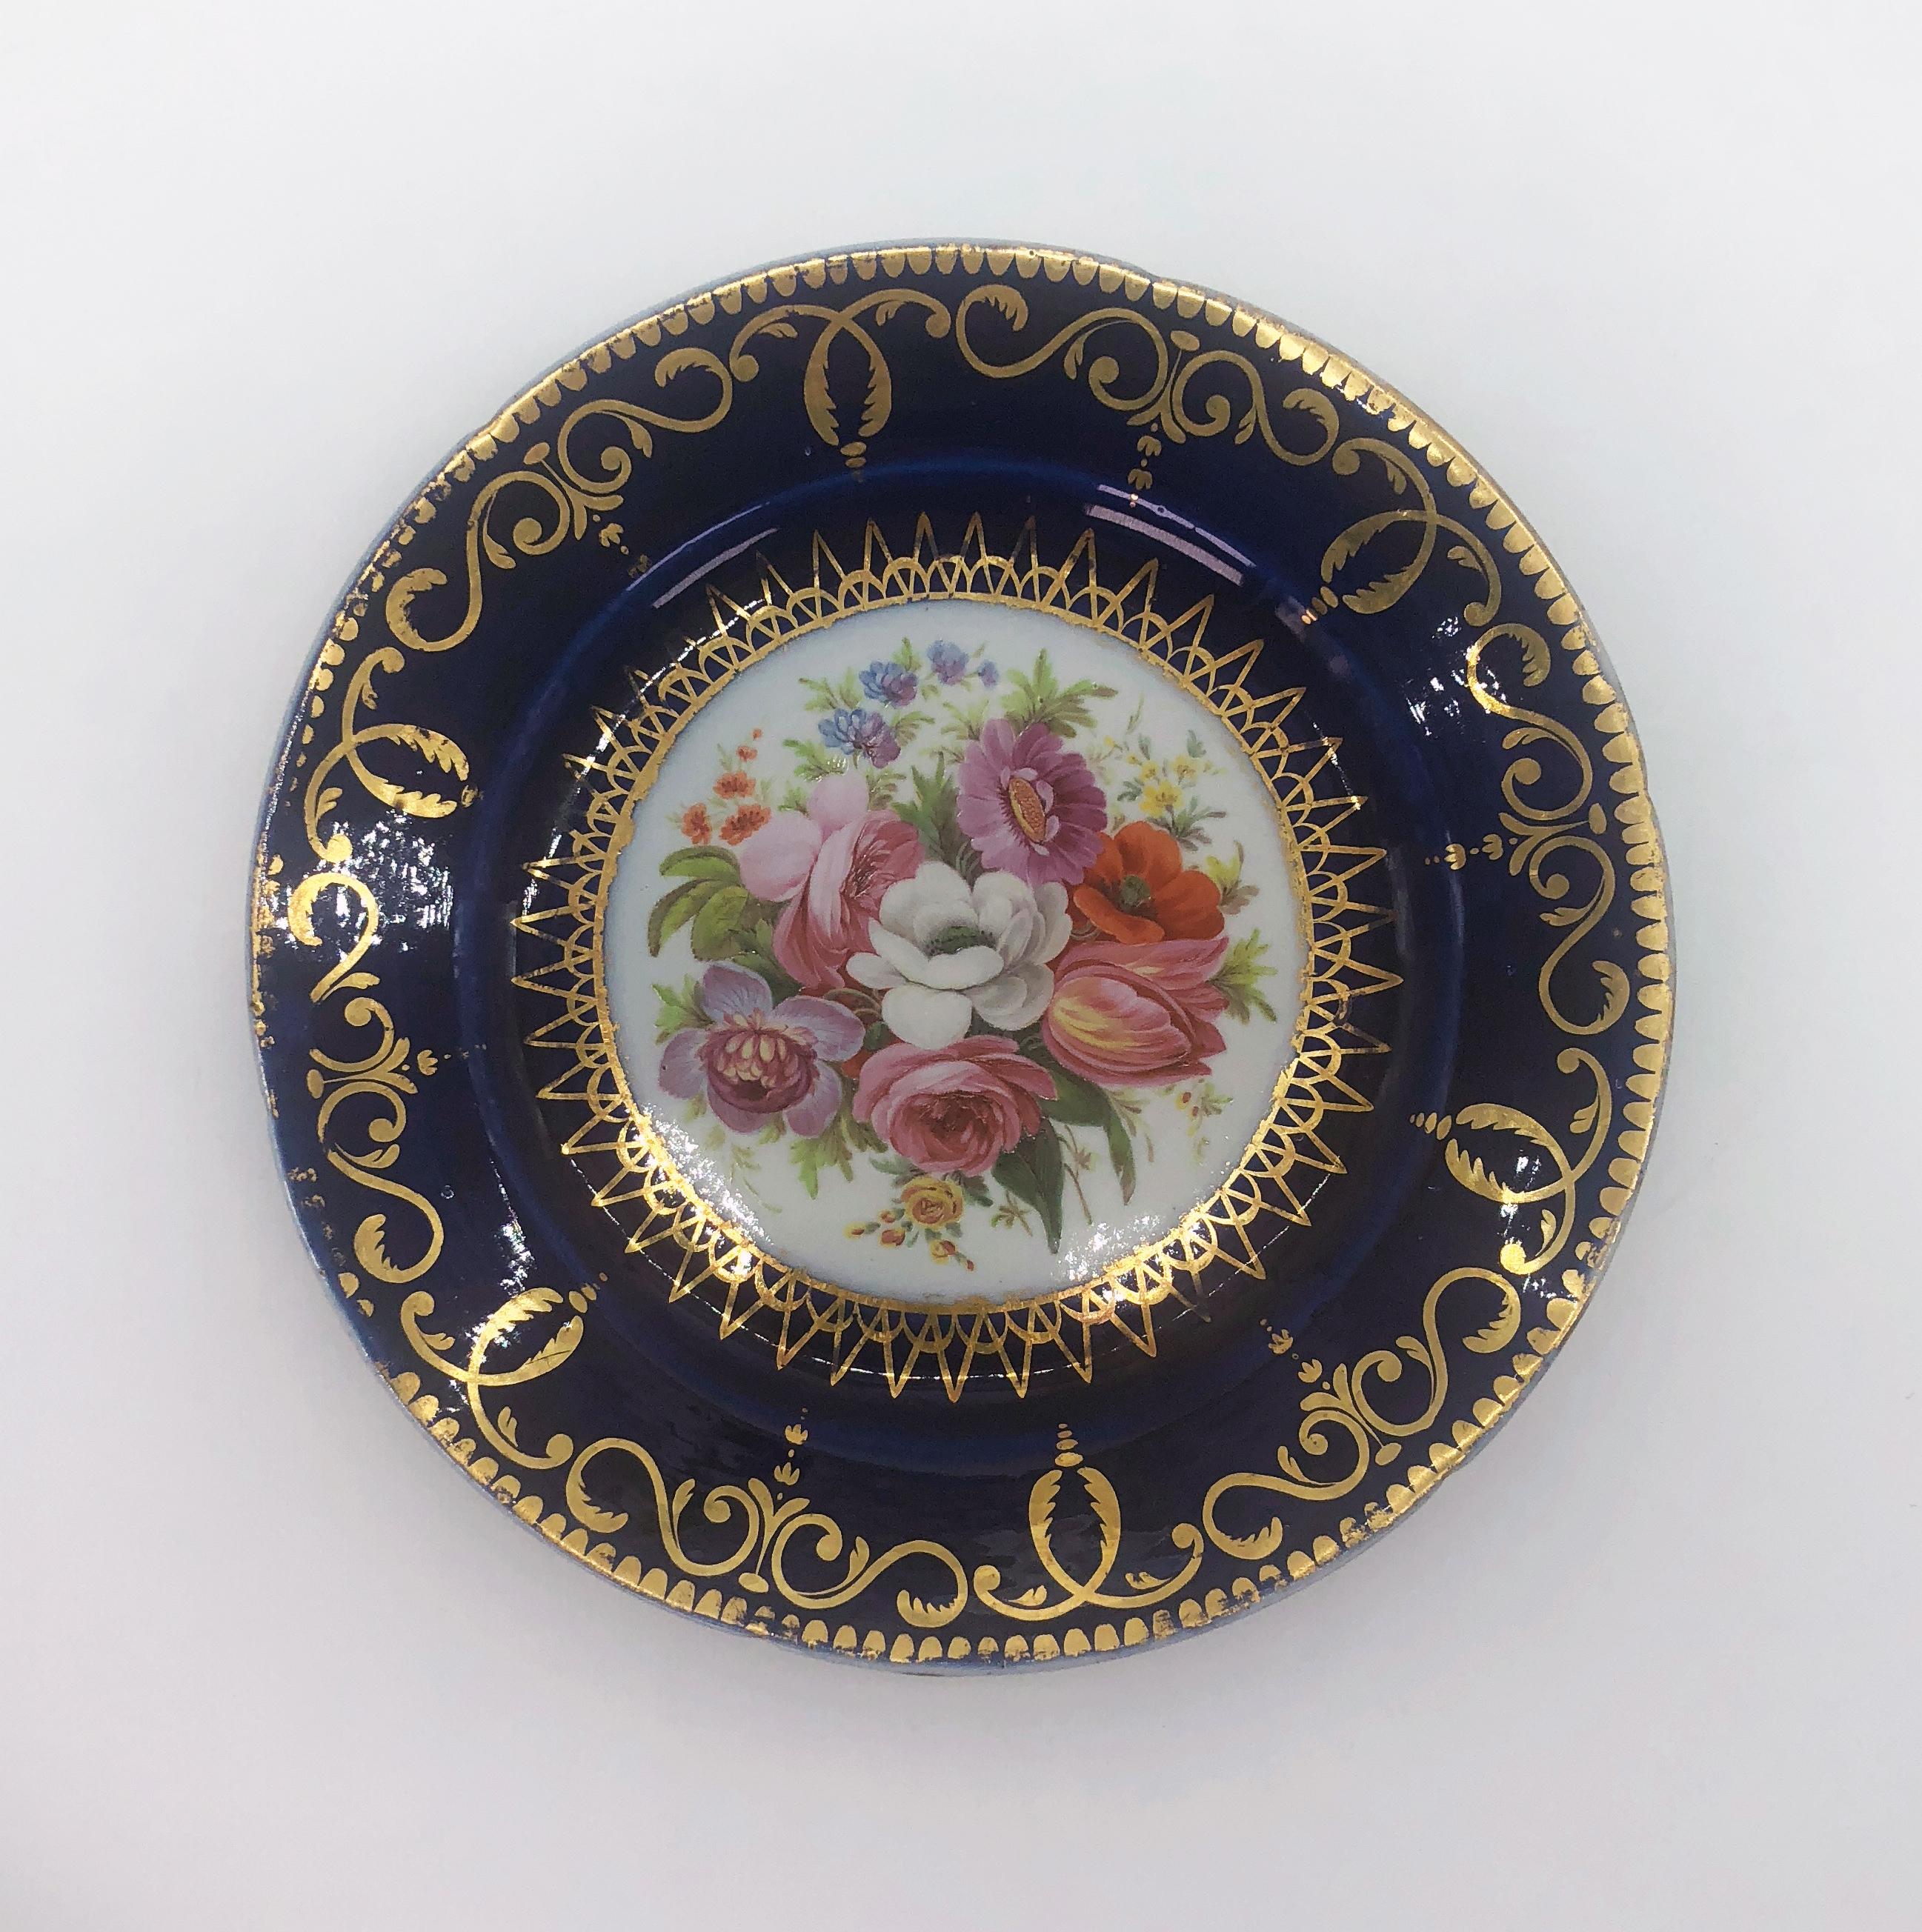 Five Regency side plates by Coalport with hand painted panels of flowers, circa 1805. Cobalt borders support a gilded band of interlocking scrolls and finials with a gold dentil border. Hand painted panels of floral bouquets in the manner of the